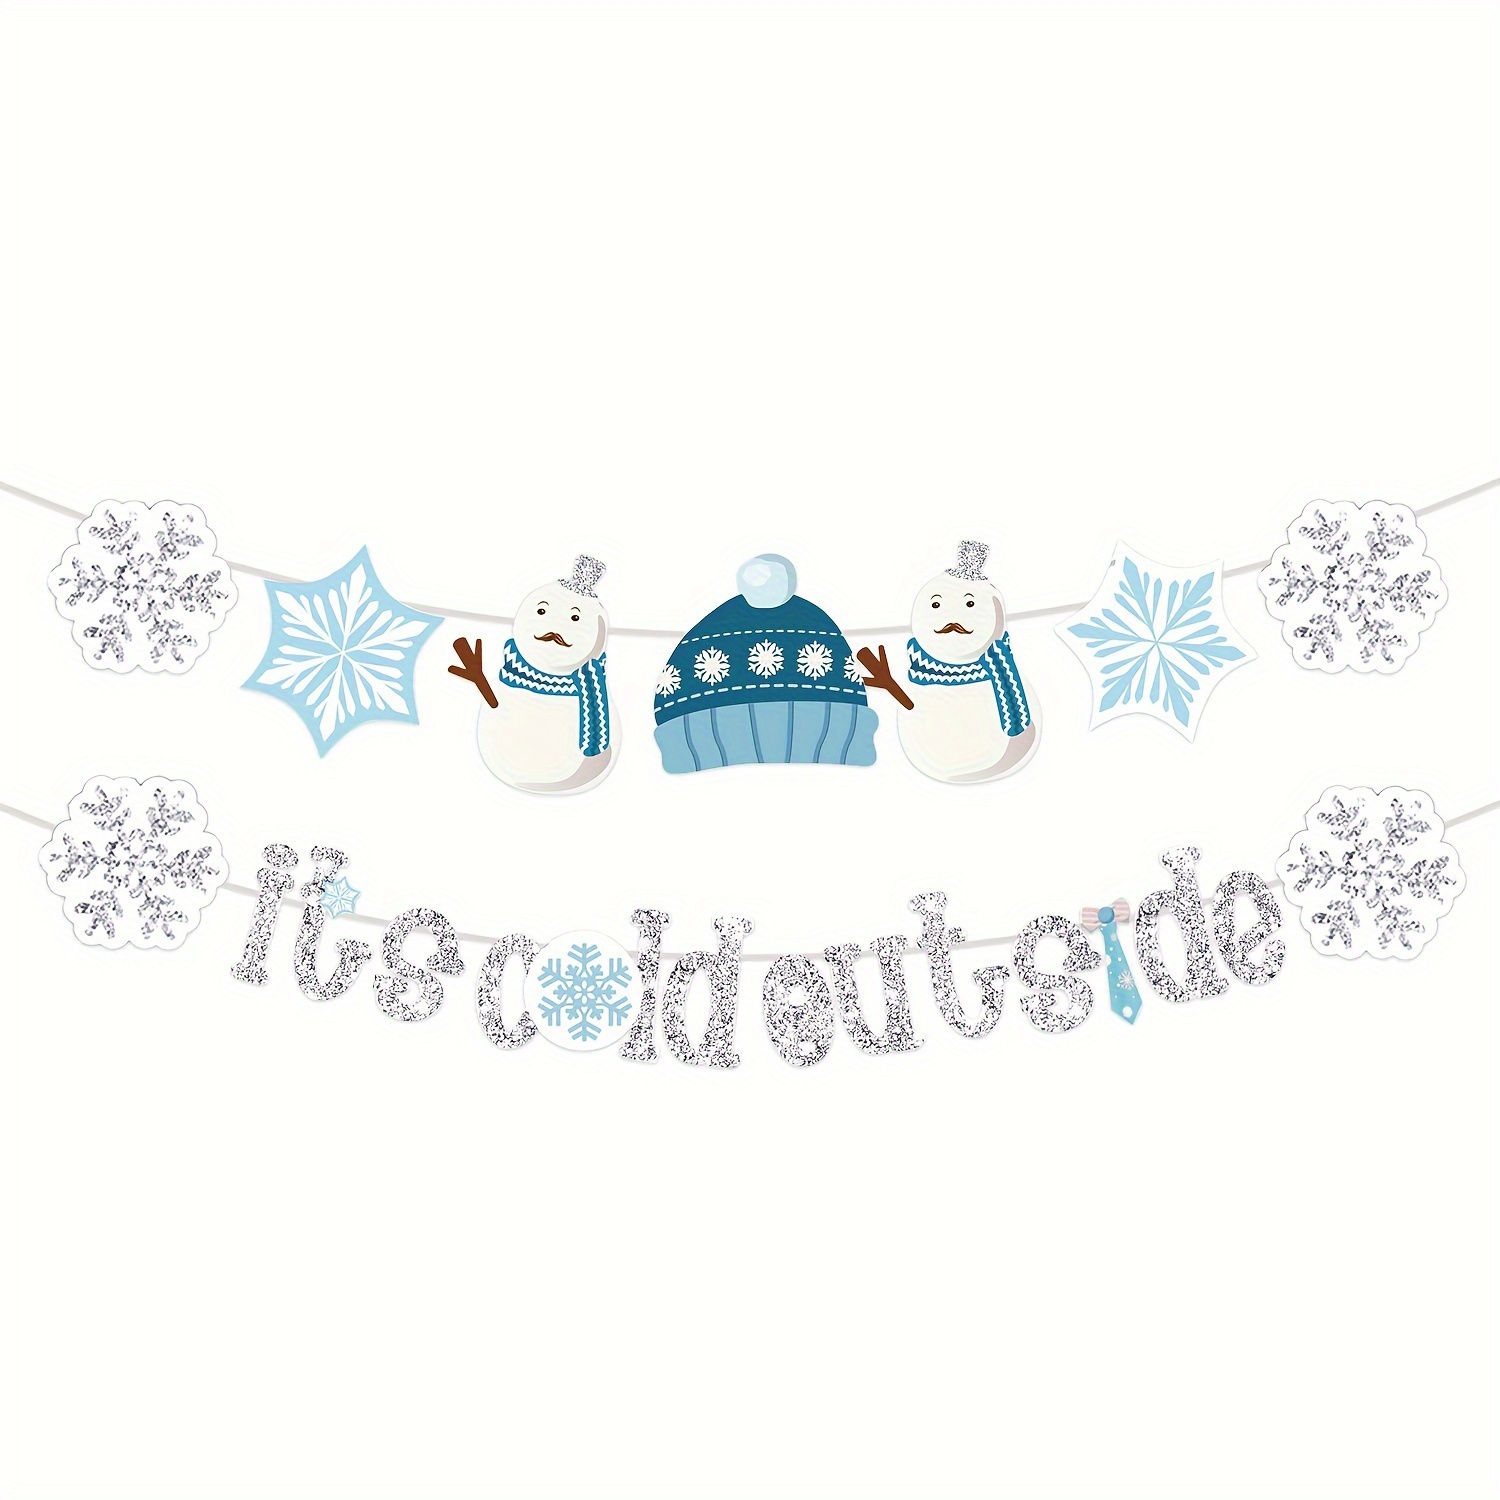  Snowflake and Frozen Party Banner Winter Snowflake Cutout  Banners 2Pcs Christmas Snow Birthday Party Decorations Winter Wonderland  Banner for Let It Snow Baby Shower Supplies : Toys & Games